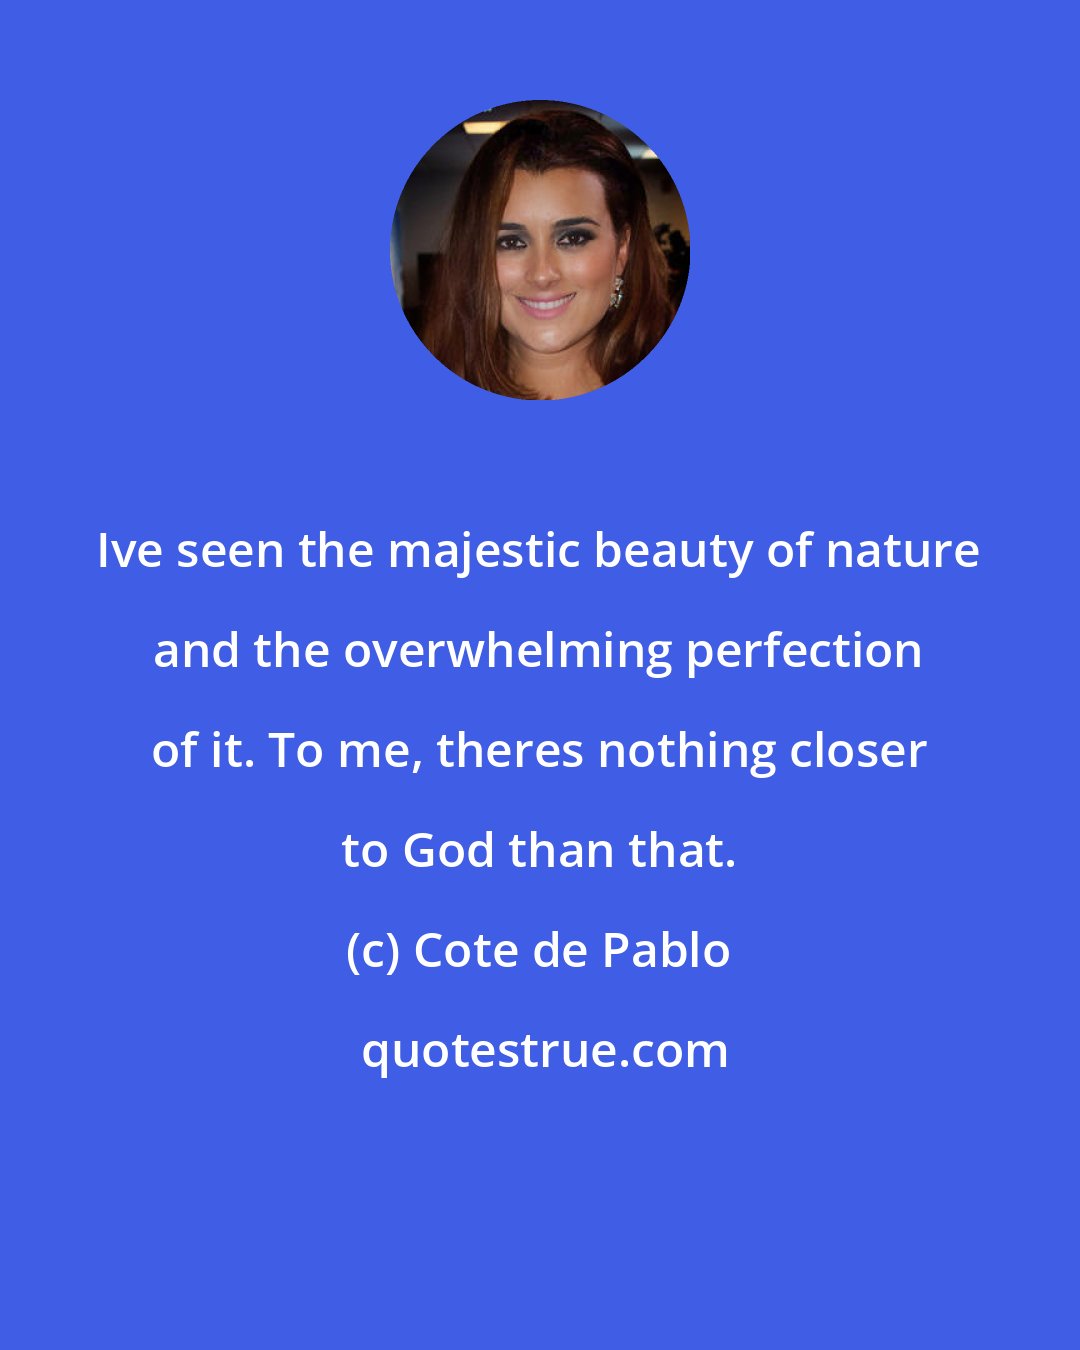 Cote de Pablo: Ive seen the majestic beauty of nature and the overwhelming perfection of it. To me, theres nothing closer to God than that.